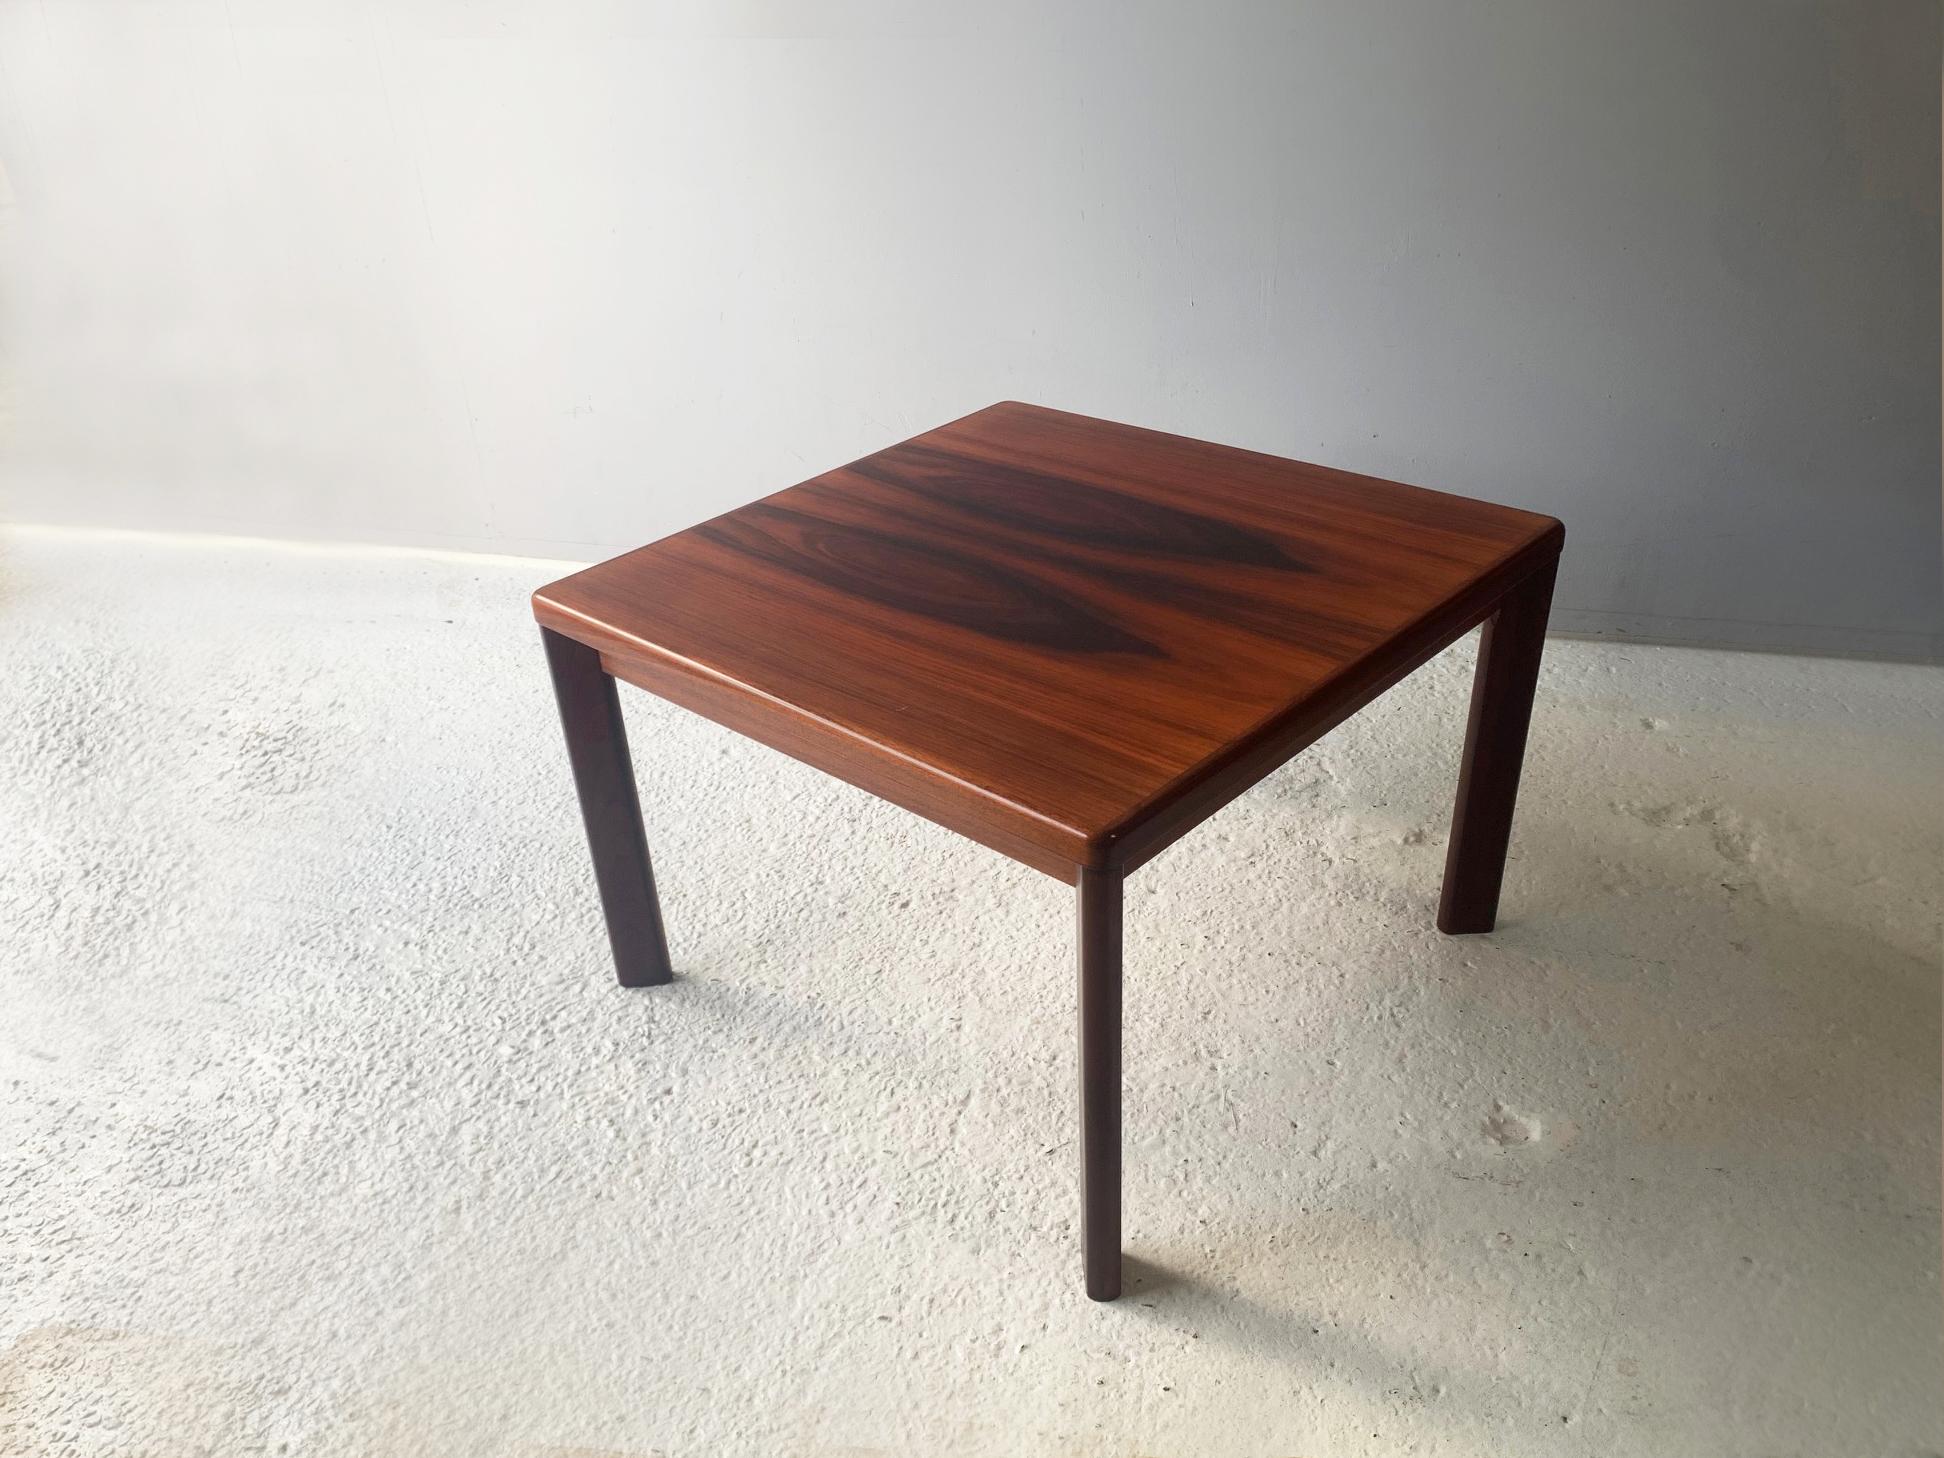 Very collectable mid century modern modern Scandinavian design rosewood coffee table, sturdy construction and fine craftsmanship. Designed by Henning Kjaernulf for Vejle Stole Møbelfabrik produced in the 1960s

Size 
Width 70cm x depth 70cm x height